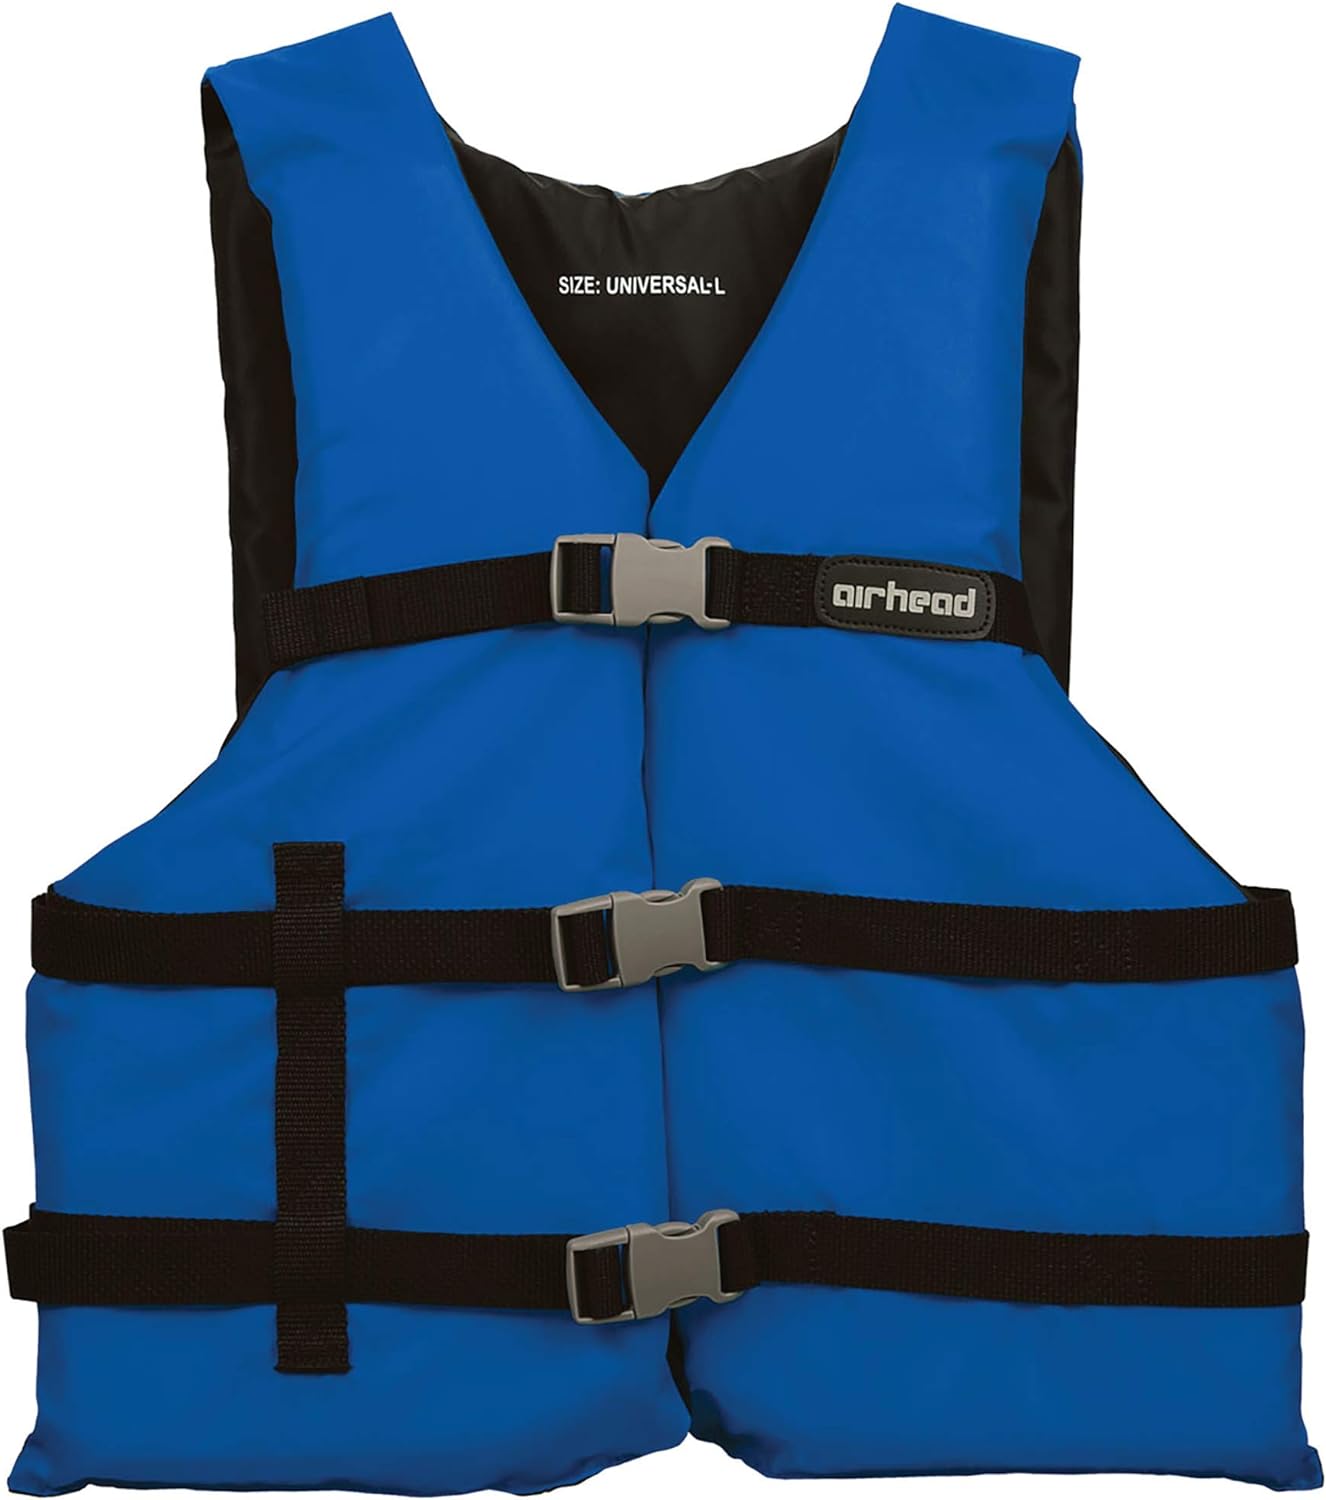 AIRHEAD General All Purpose Life Jacket, US Coast Guard Approved Type III Life Vest, Perfect for Boating and Personal Watercraft Use - AIRHEAD General All Purpose Life Jacket Review